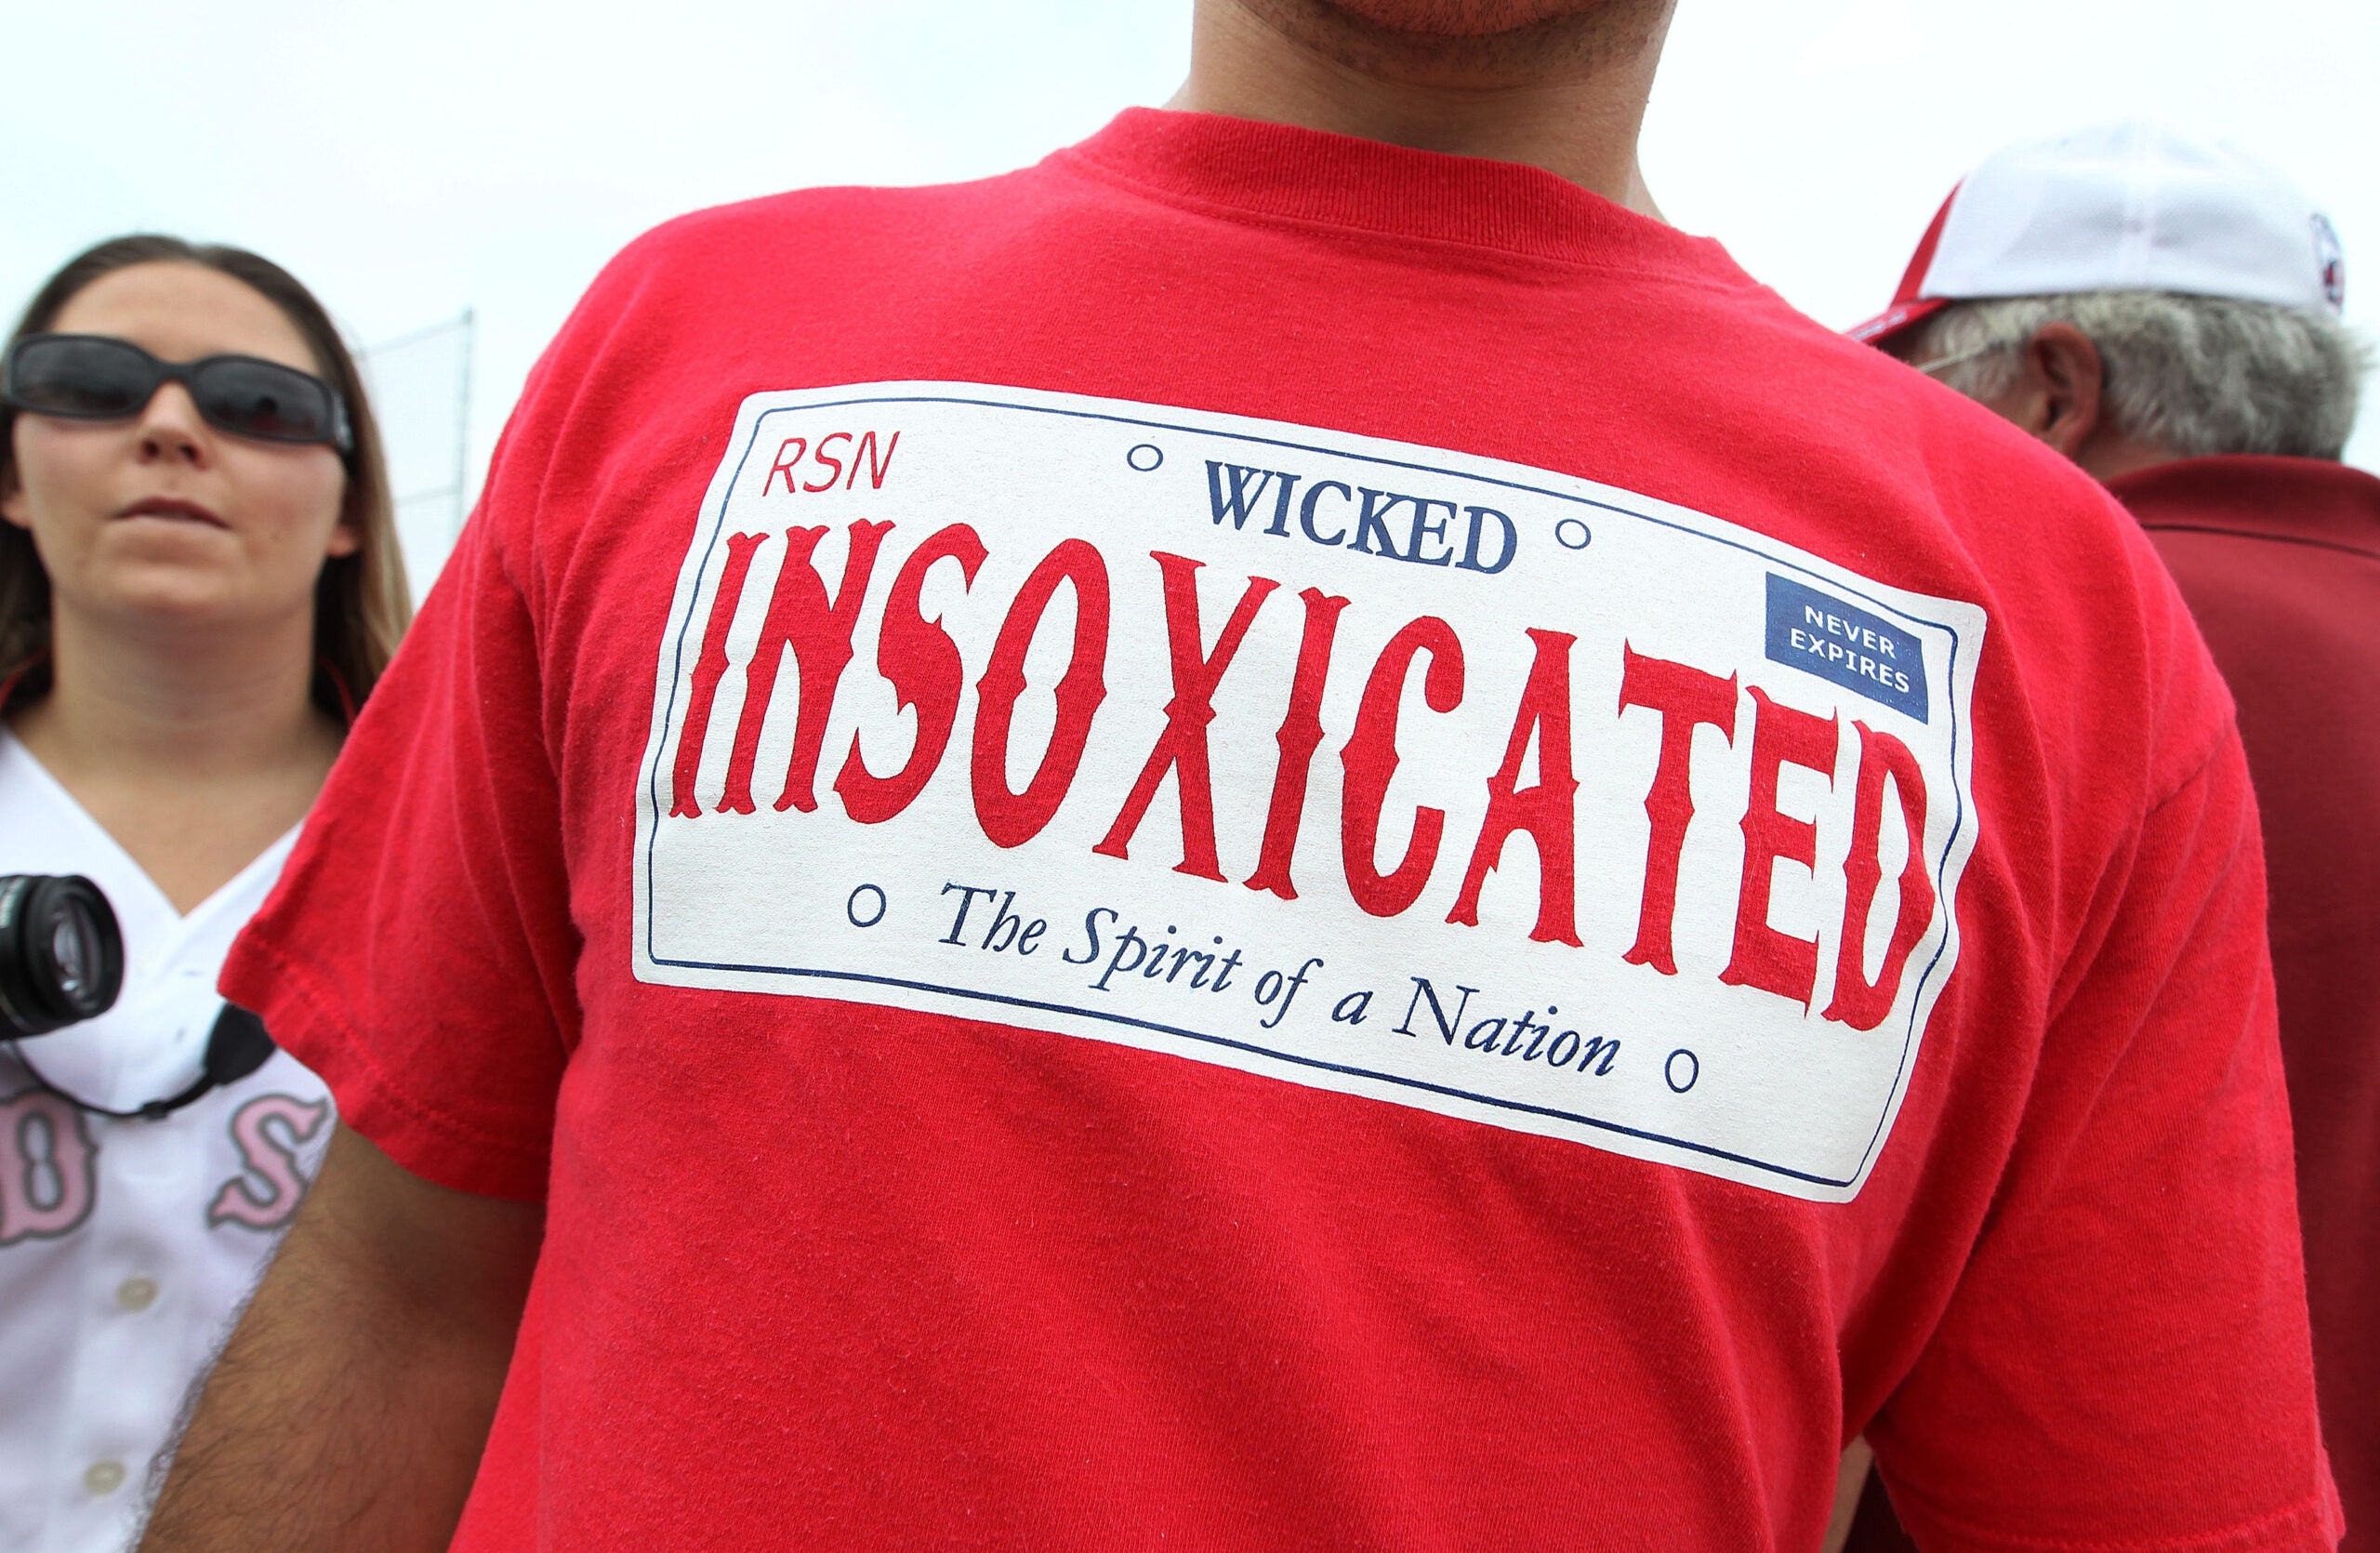 wicked awesome red sox shirt